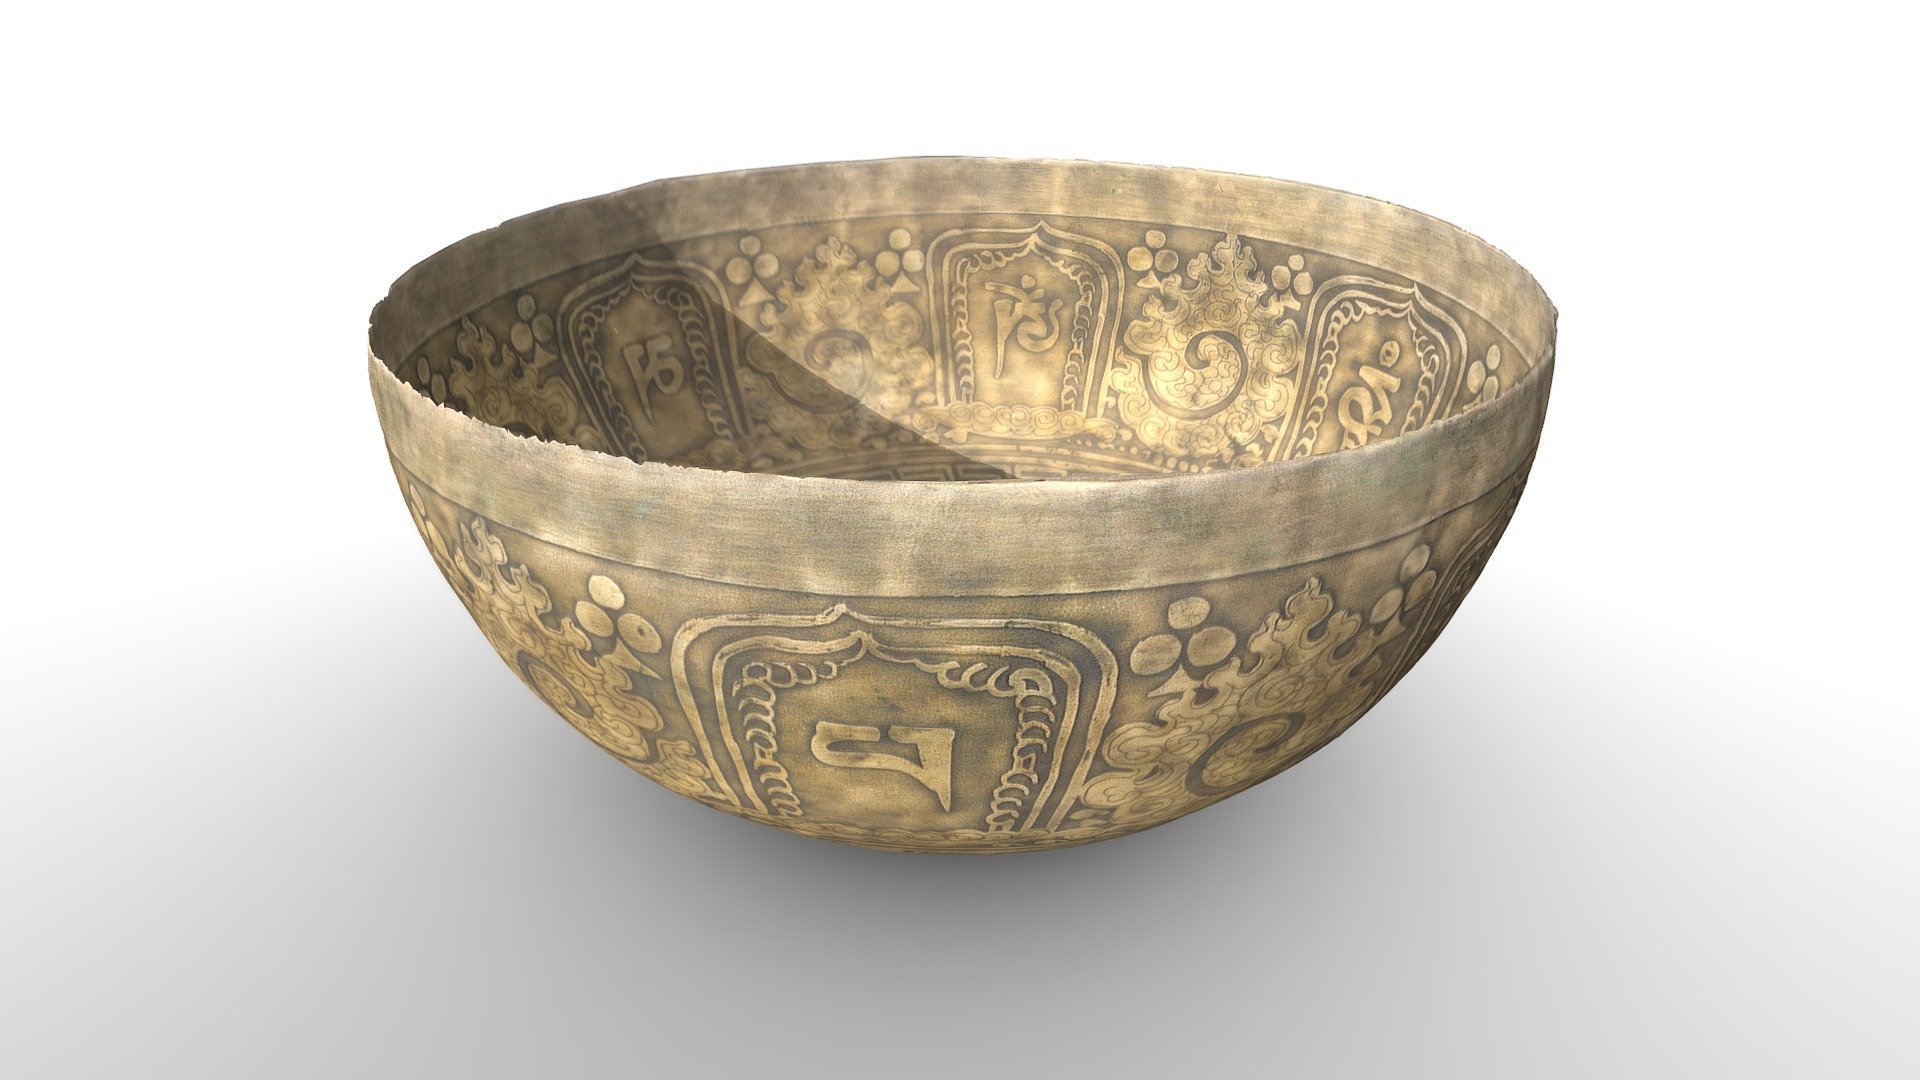 Tibetan Singing Bowl made of bronze, purchased from Golden Temple Singing Bowls and Healing Center (in Nepal)

Also known as the Standing Bell, used for religous (Buddhist) and &ldquo;spiritual